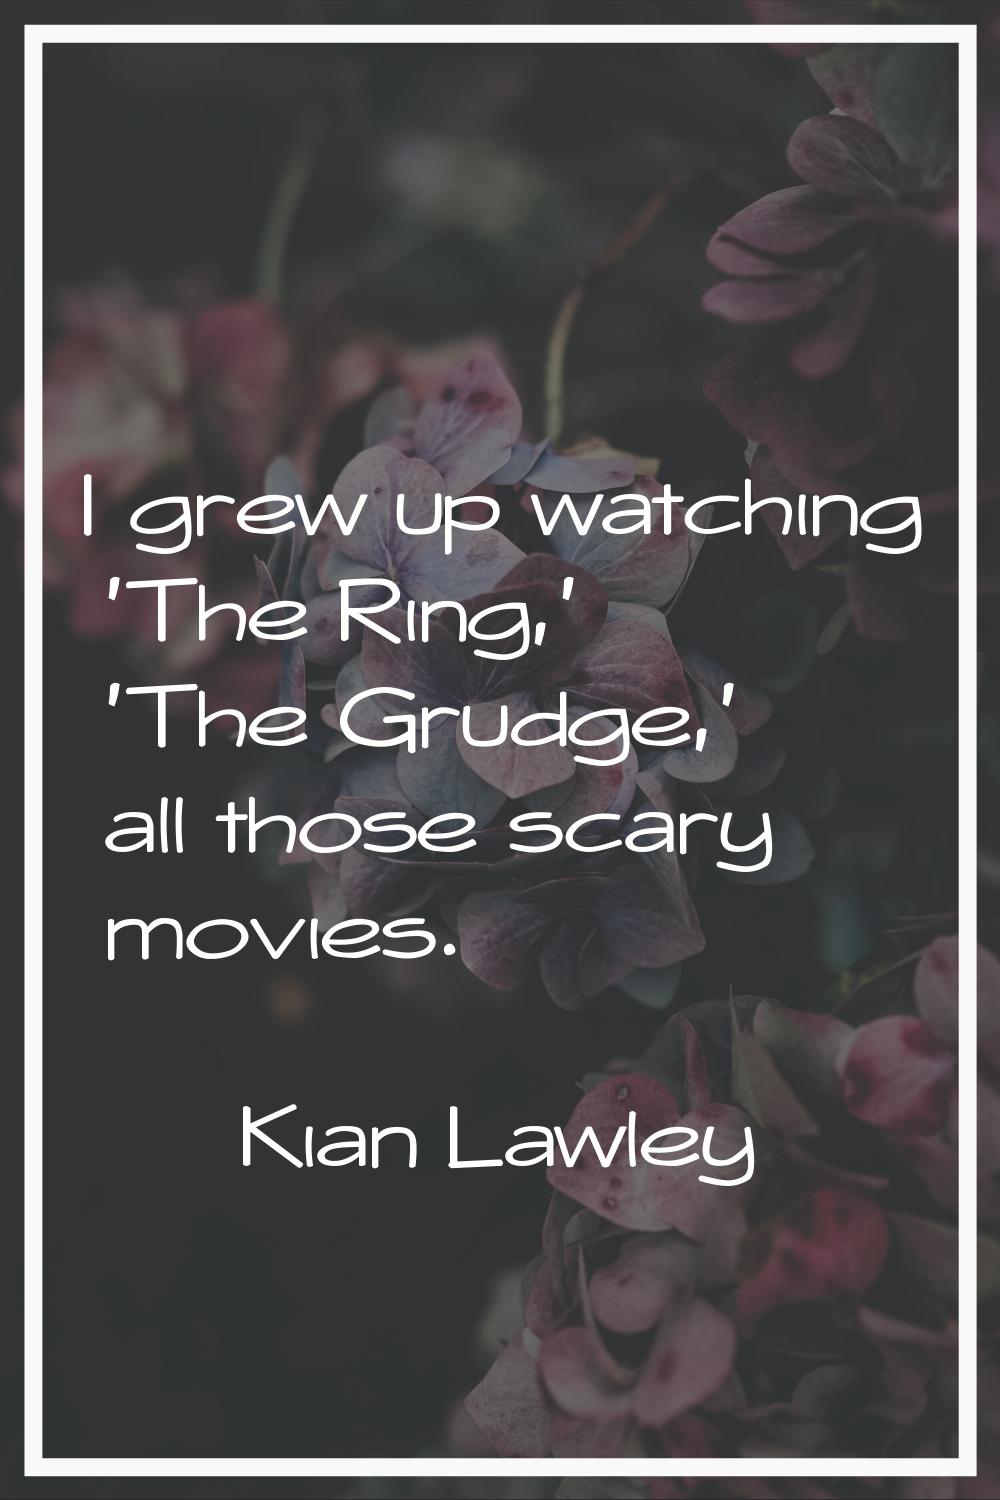 I grew up watching 'The Ring,' 'The Grudge,' all those scary movies.